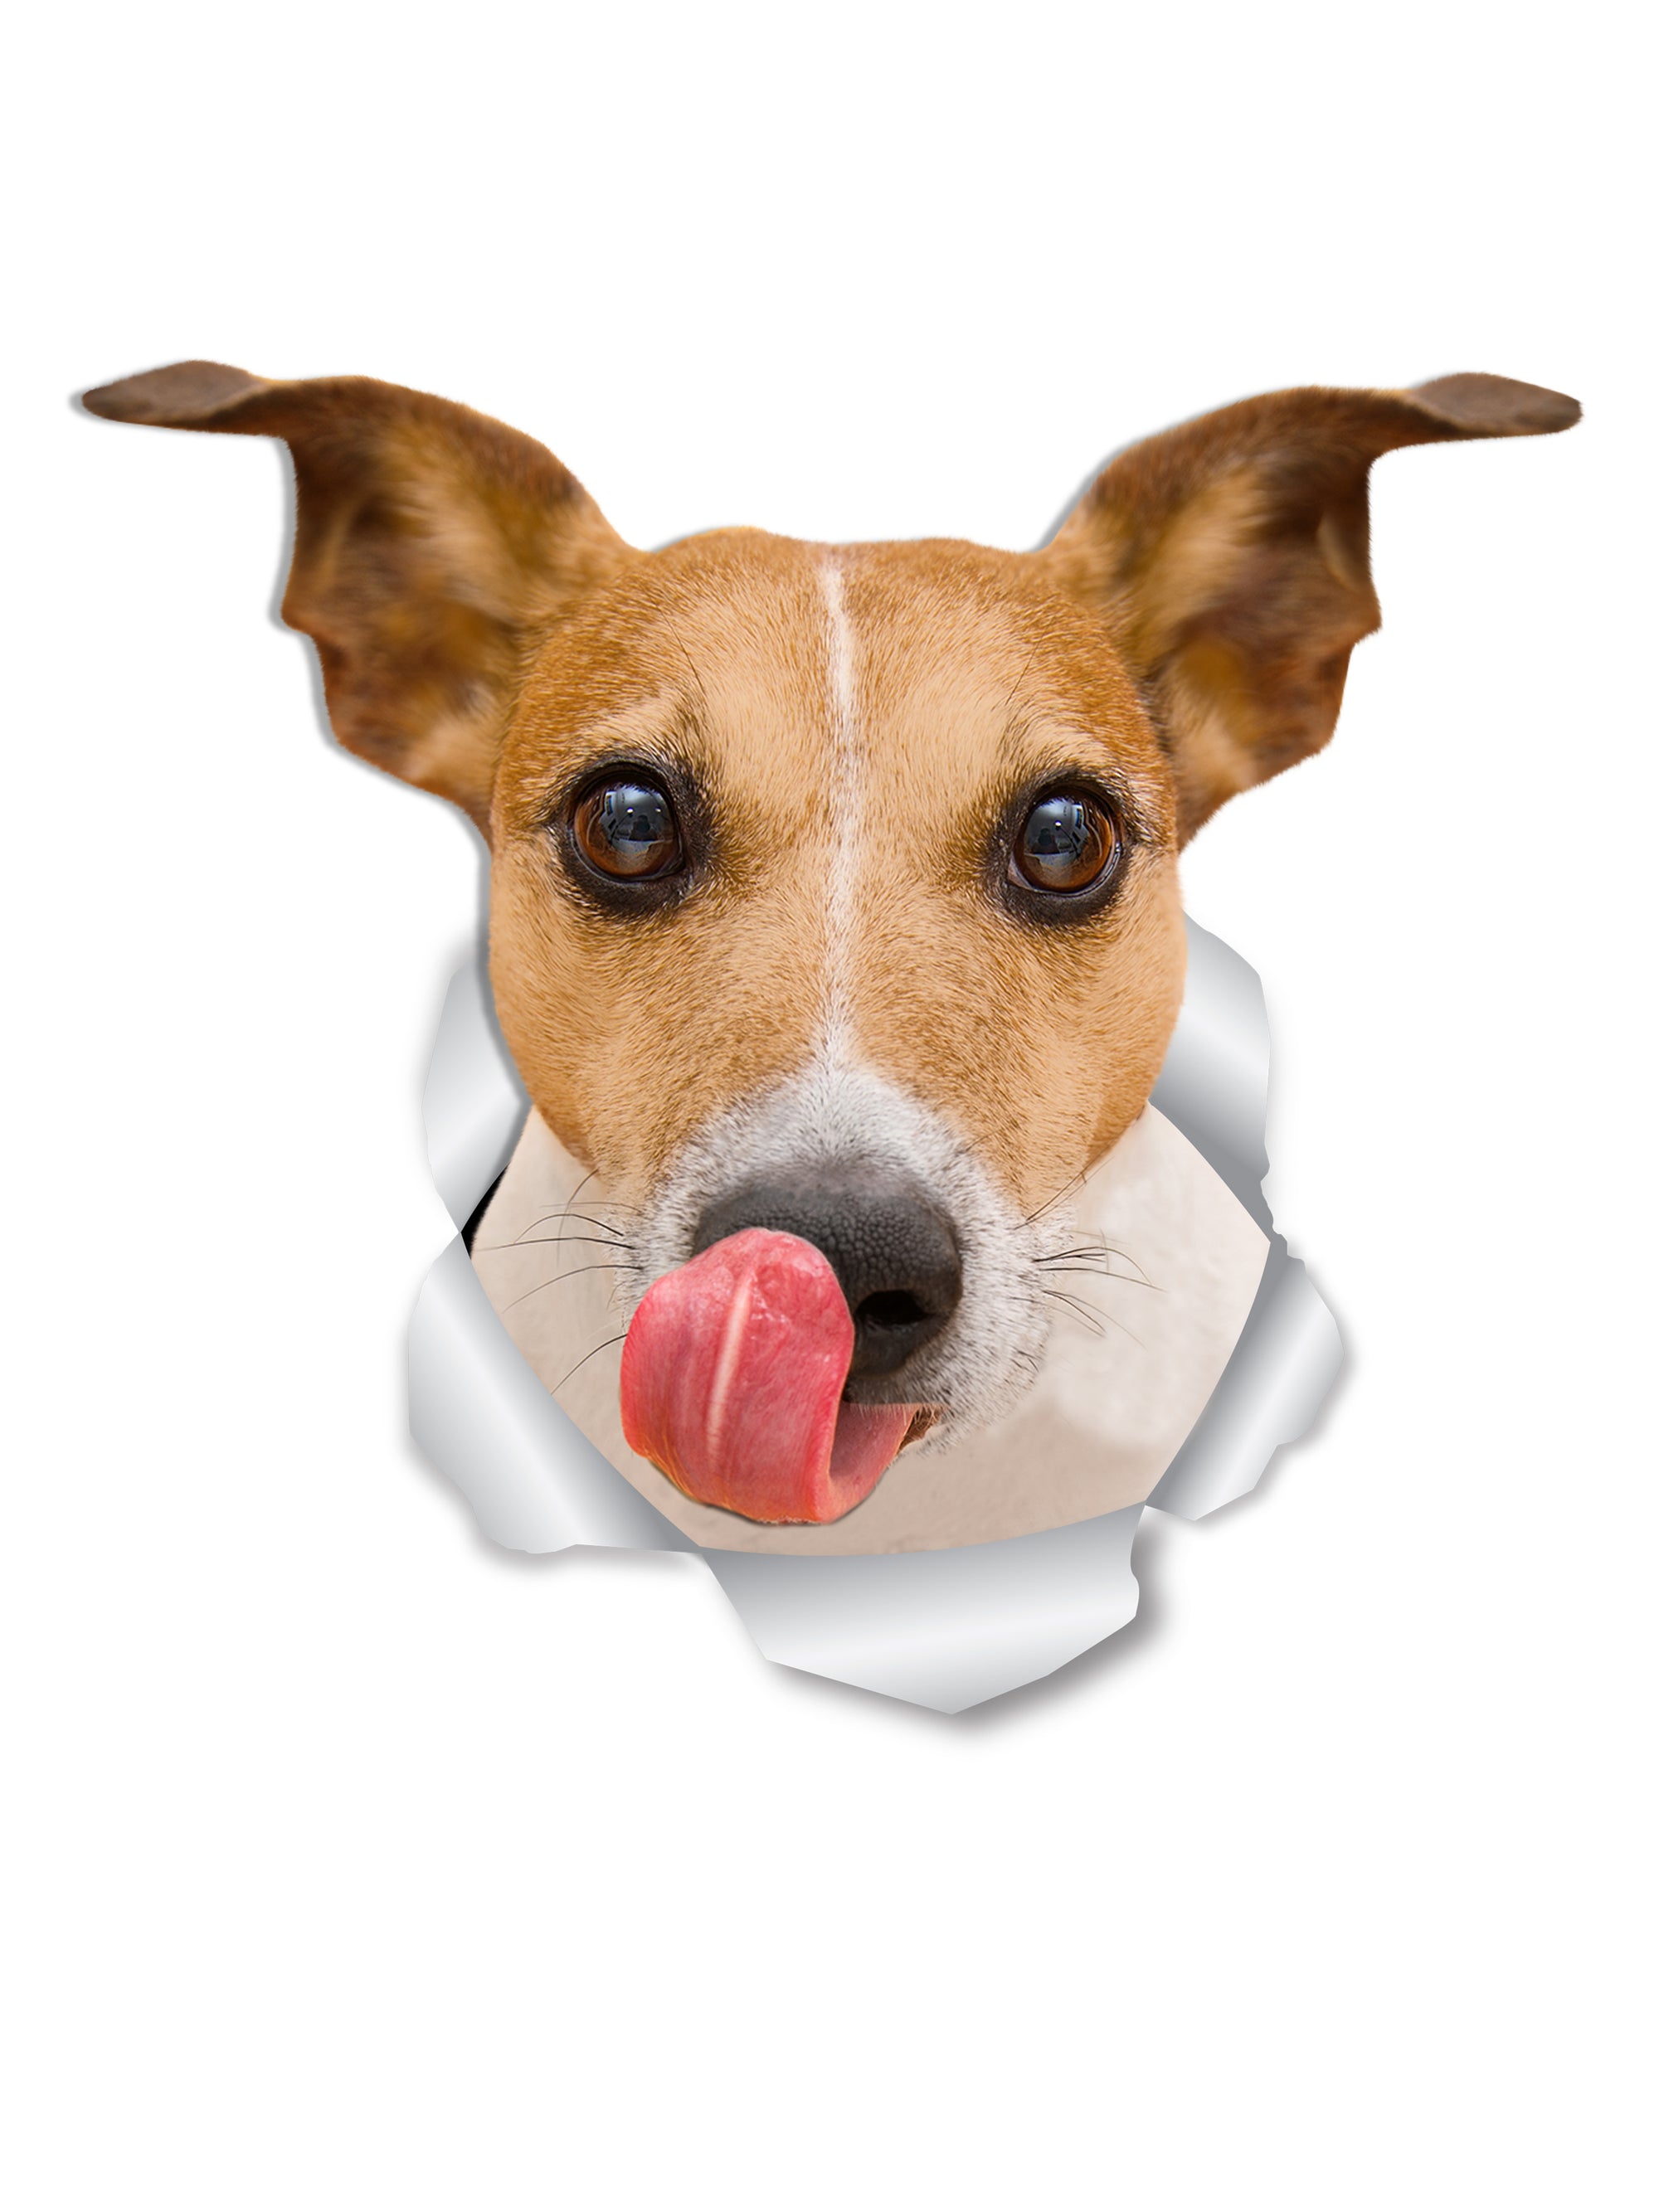 Thirsty Jack Russell Decals